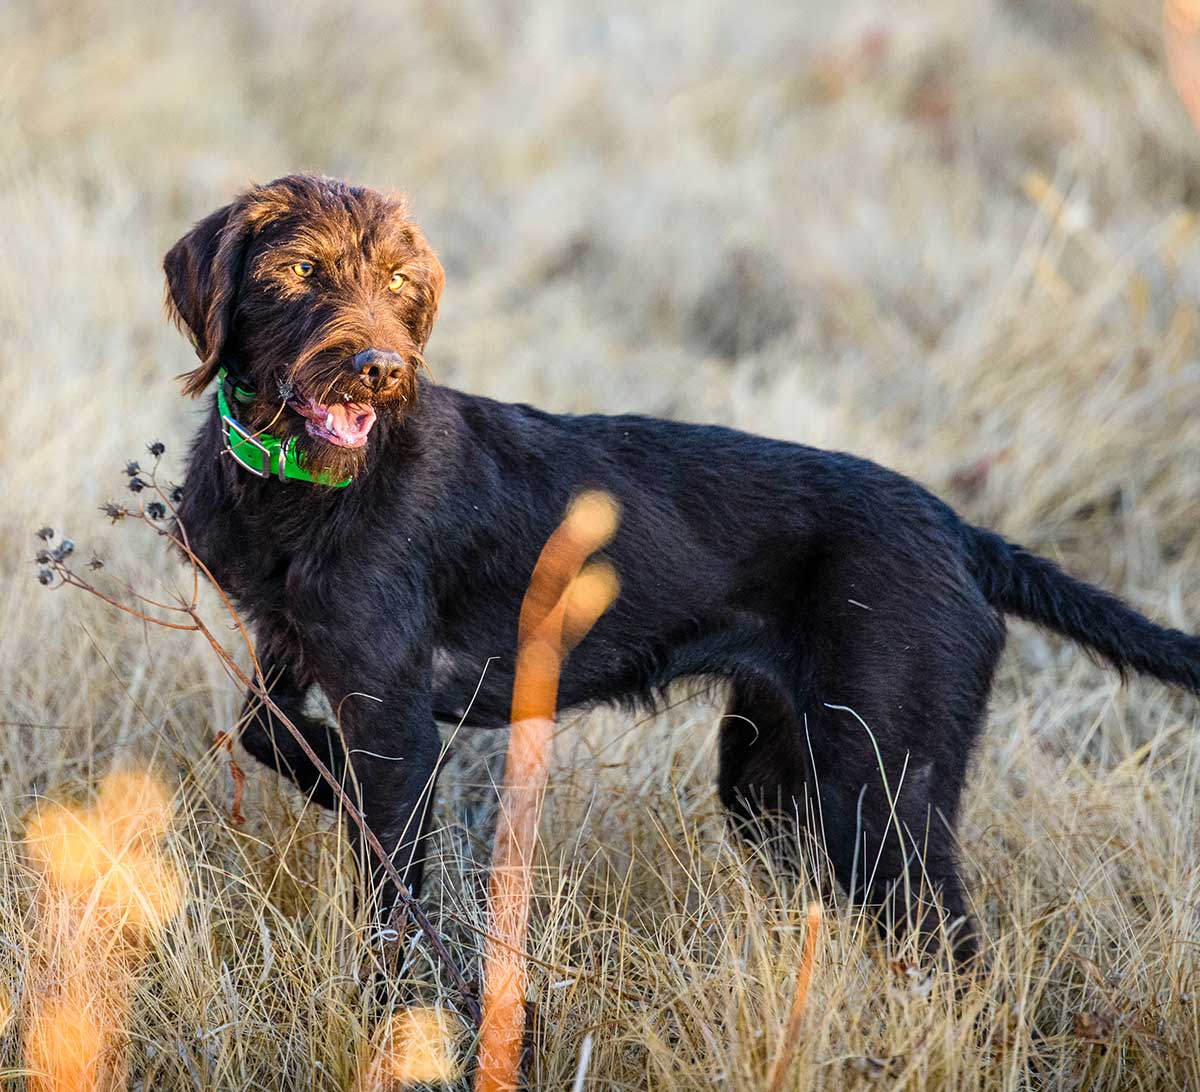 brown hunting dog with a green collar standing in a field